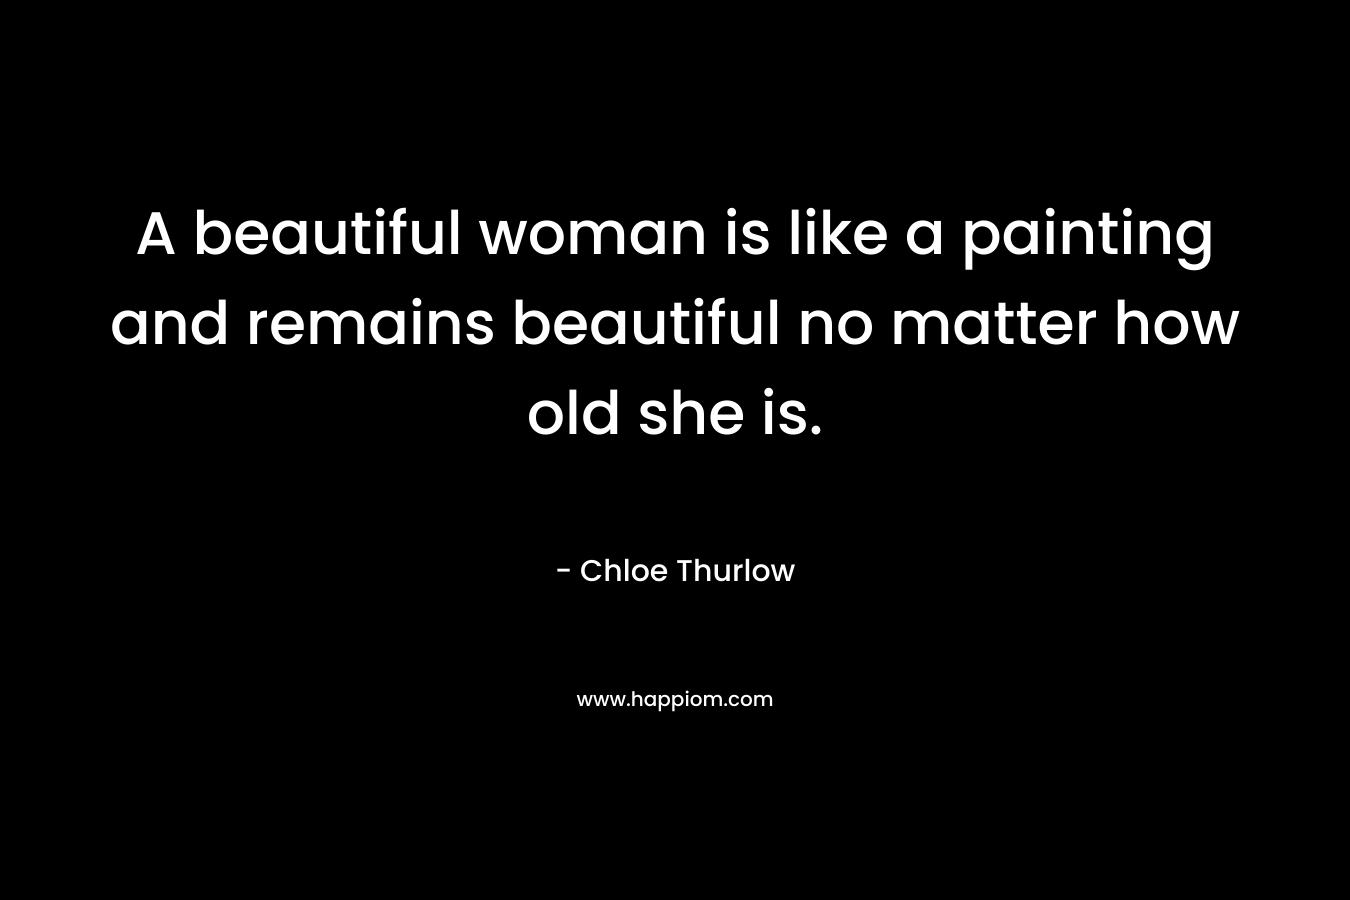 A beautiful woman is like a painting and remains beautiful no matter how old she is.